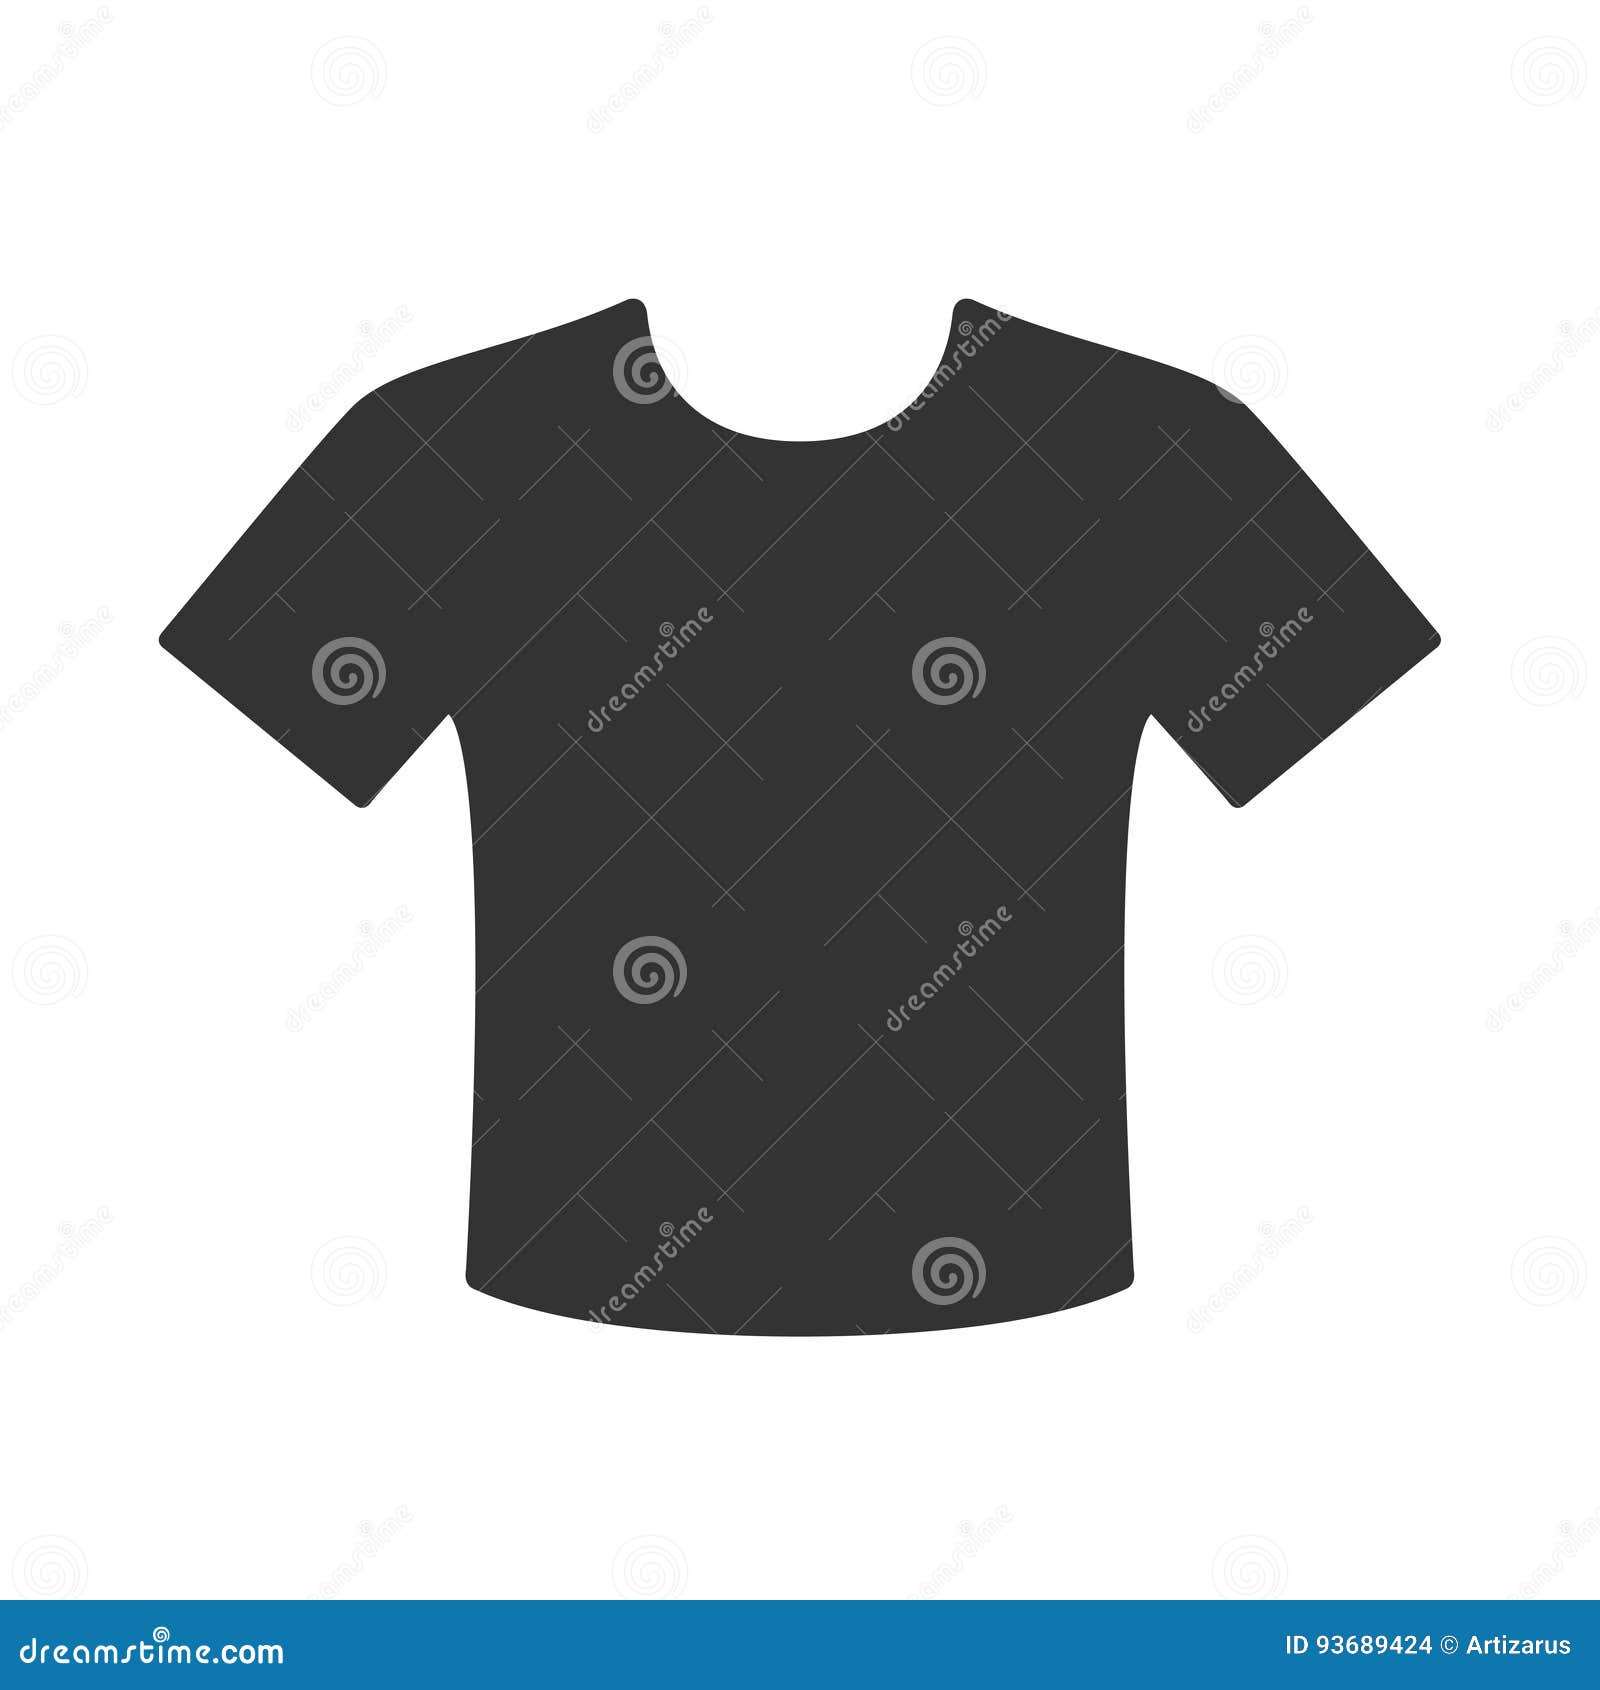 T-shirt icon stock vector. Illustration of sign, black - 93689424